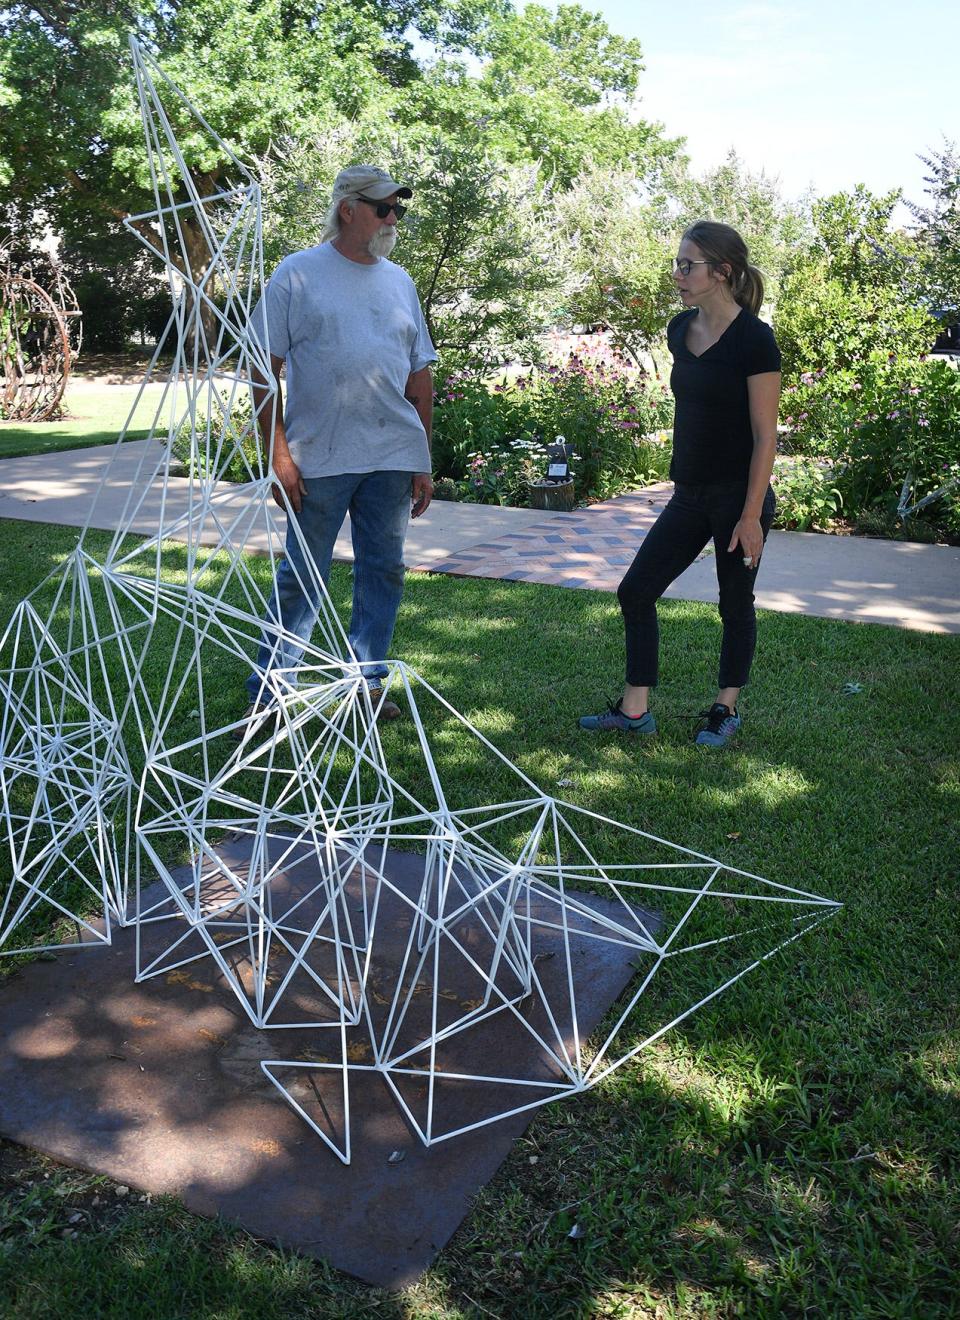 In this 2021 photo, sculpture artist and installer Joe Barrington talks with artist Amy Hoagland about her powder coated welded steel piece, "Ice Frame", at the Kemp Center for the Arts.